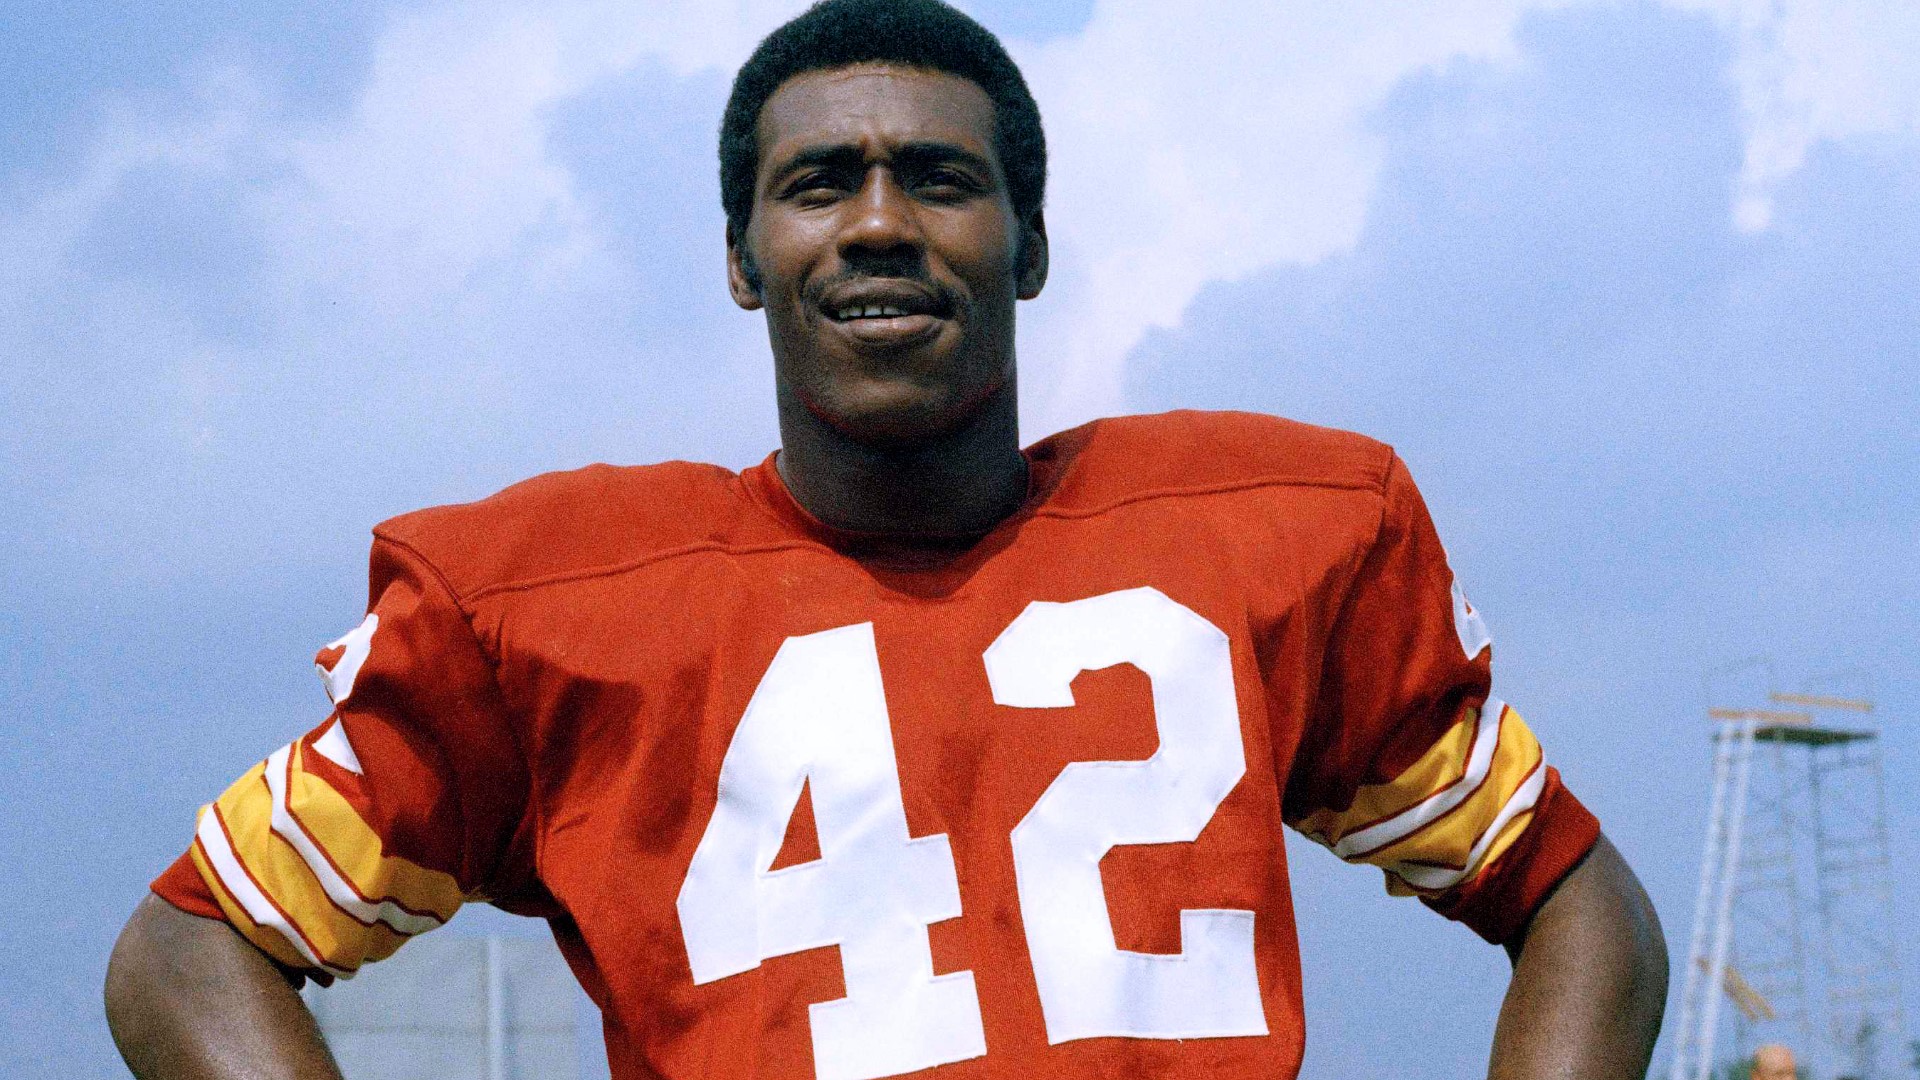 A Washington football legend has died as one of the most decorated players in the franchise's history.